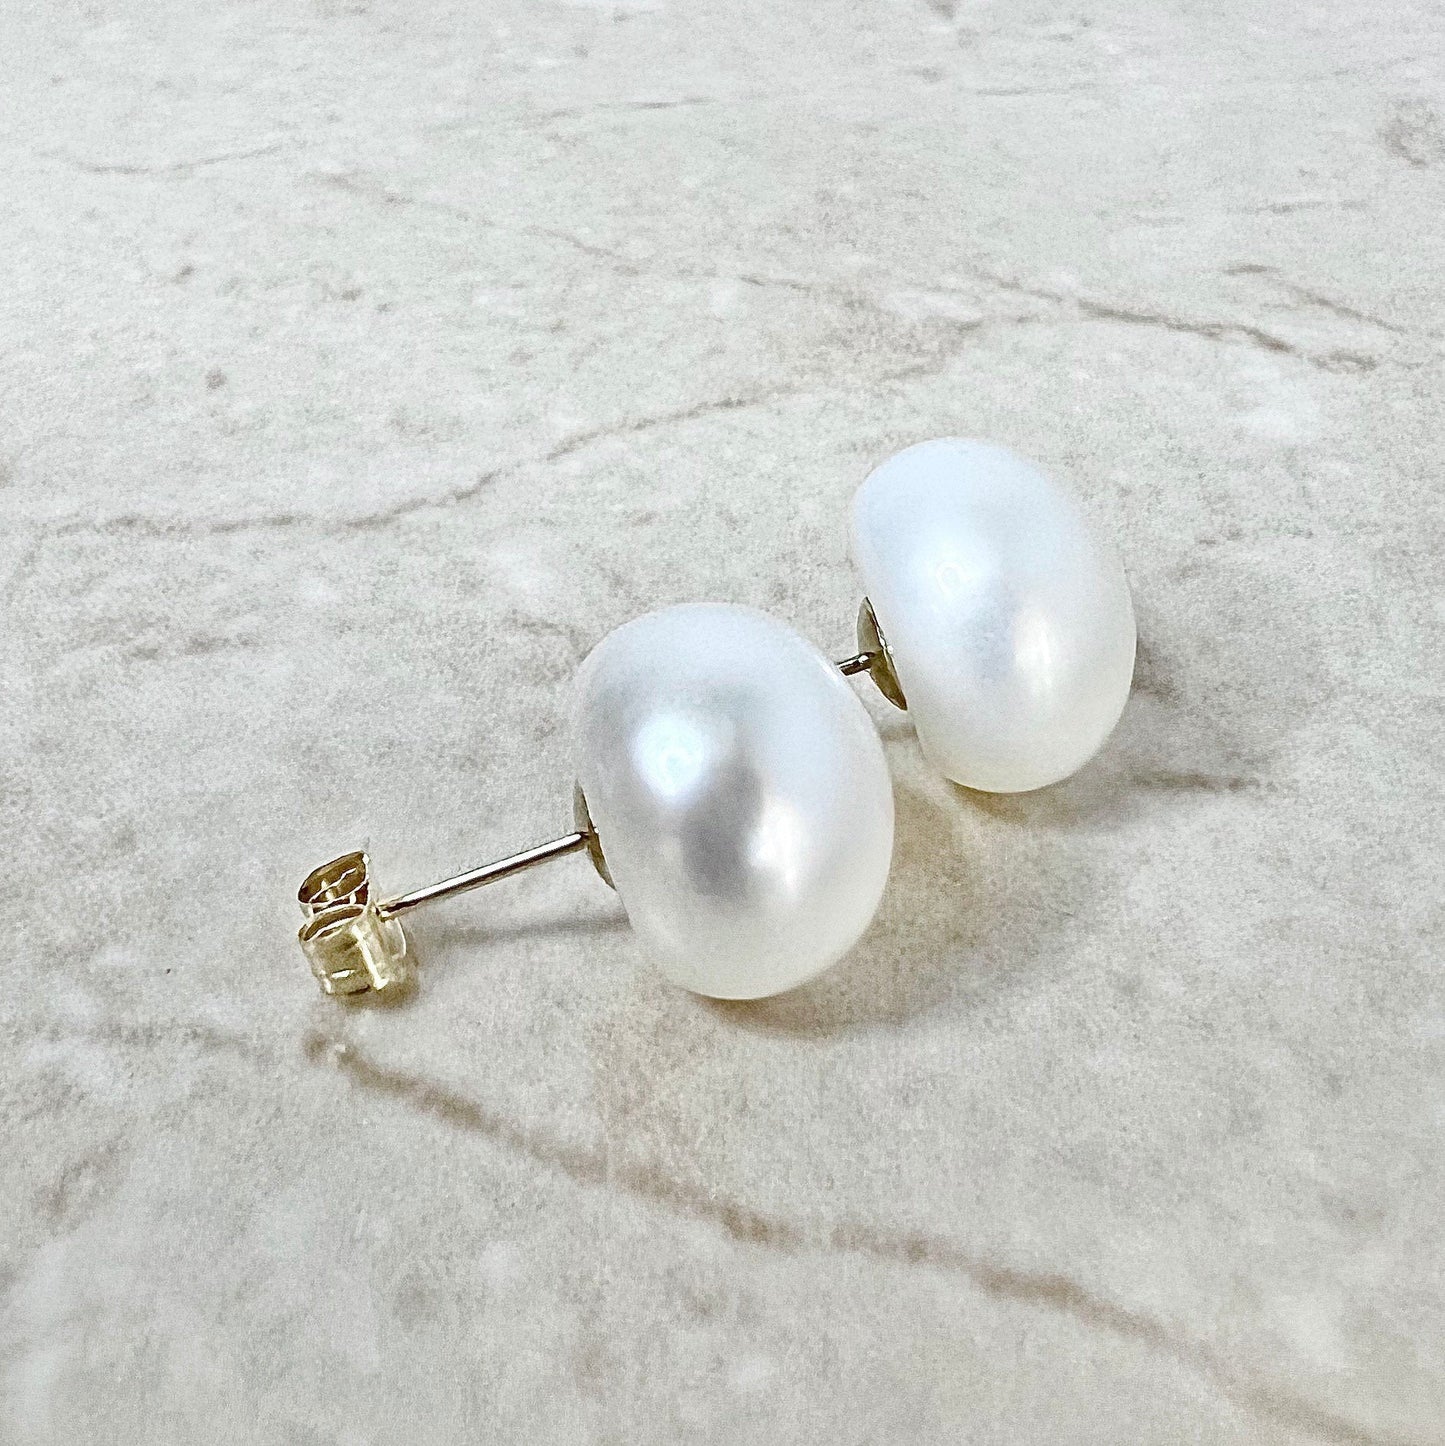 Large 14K 12 mm White Pearl Stud Earrings - Yellow Gold - Genuine Freshwater Button Pearls - June Birthstone - Best Birthday Gift For Her